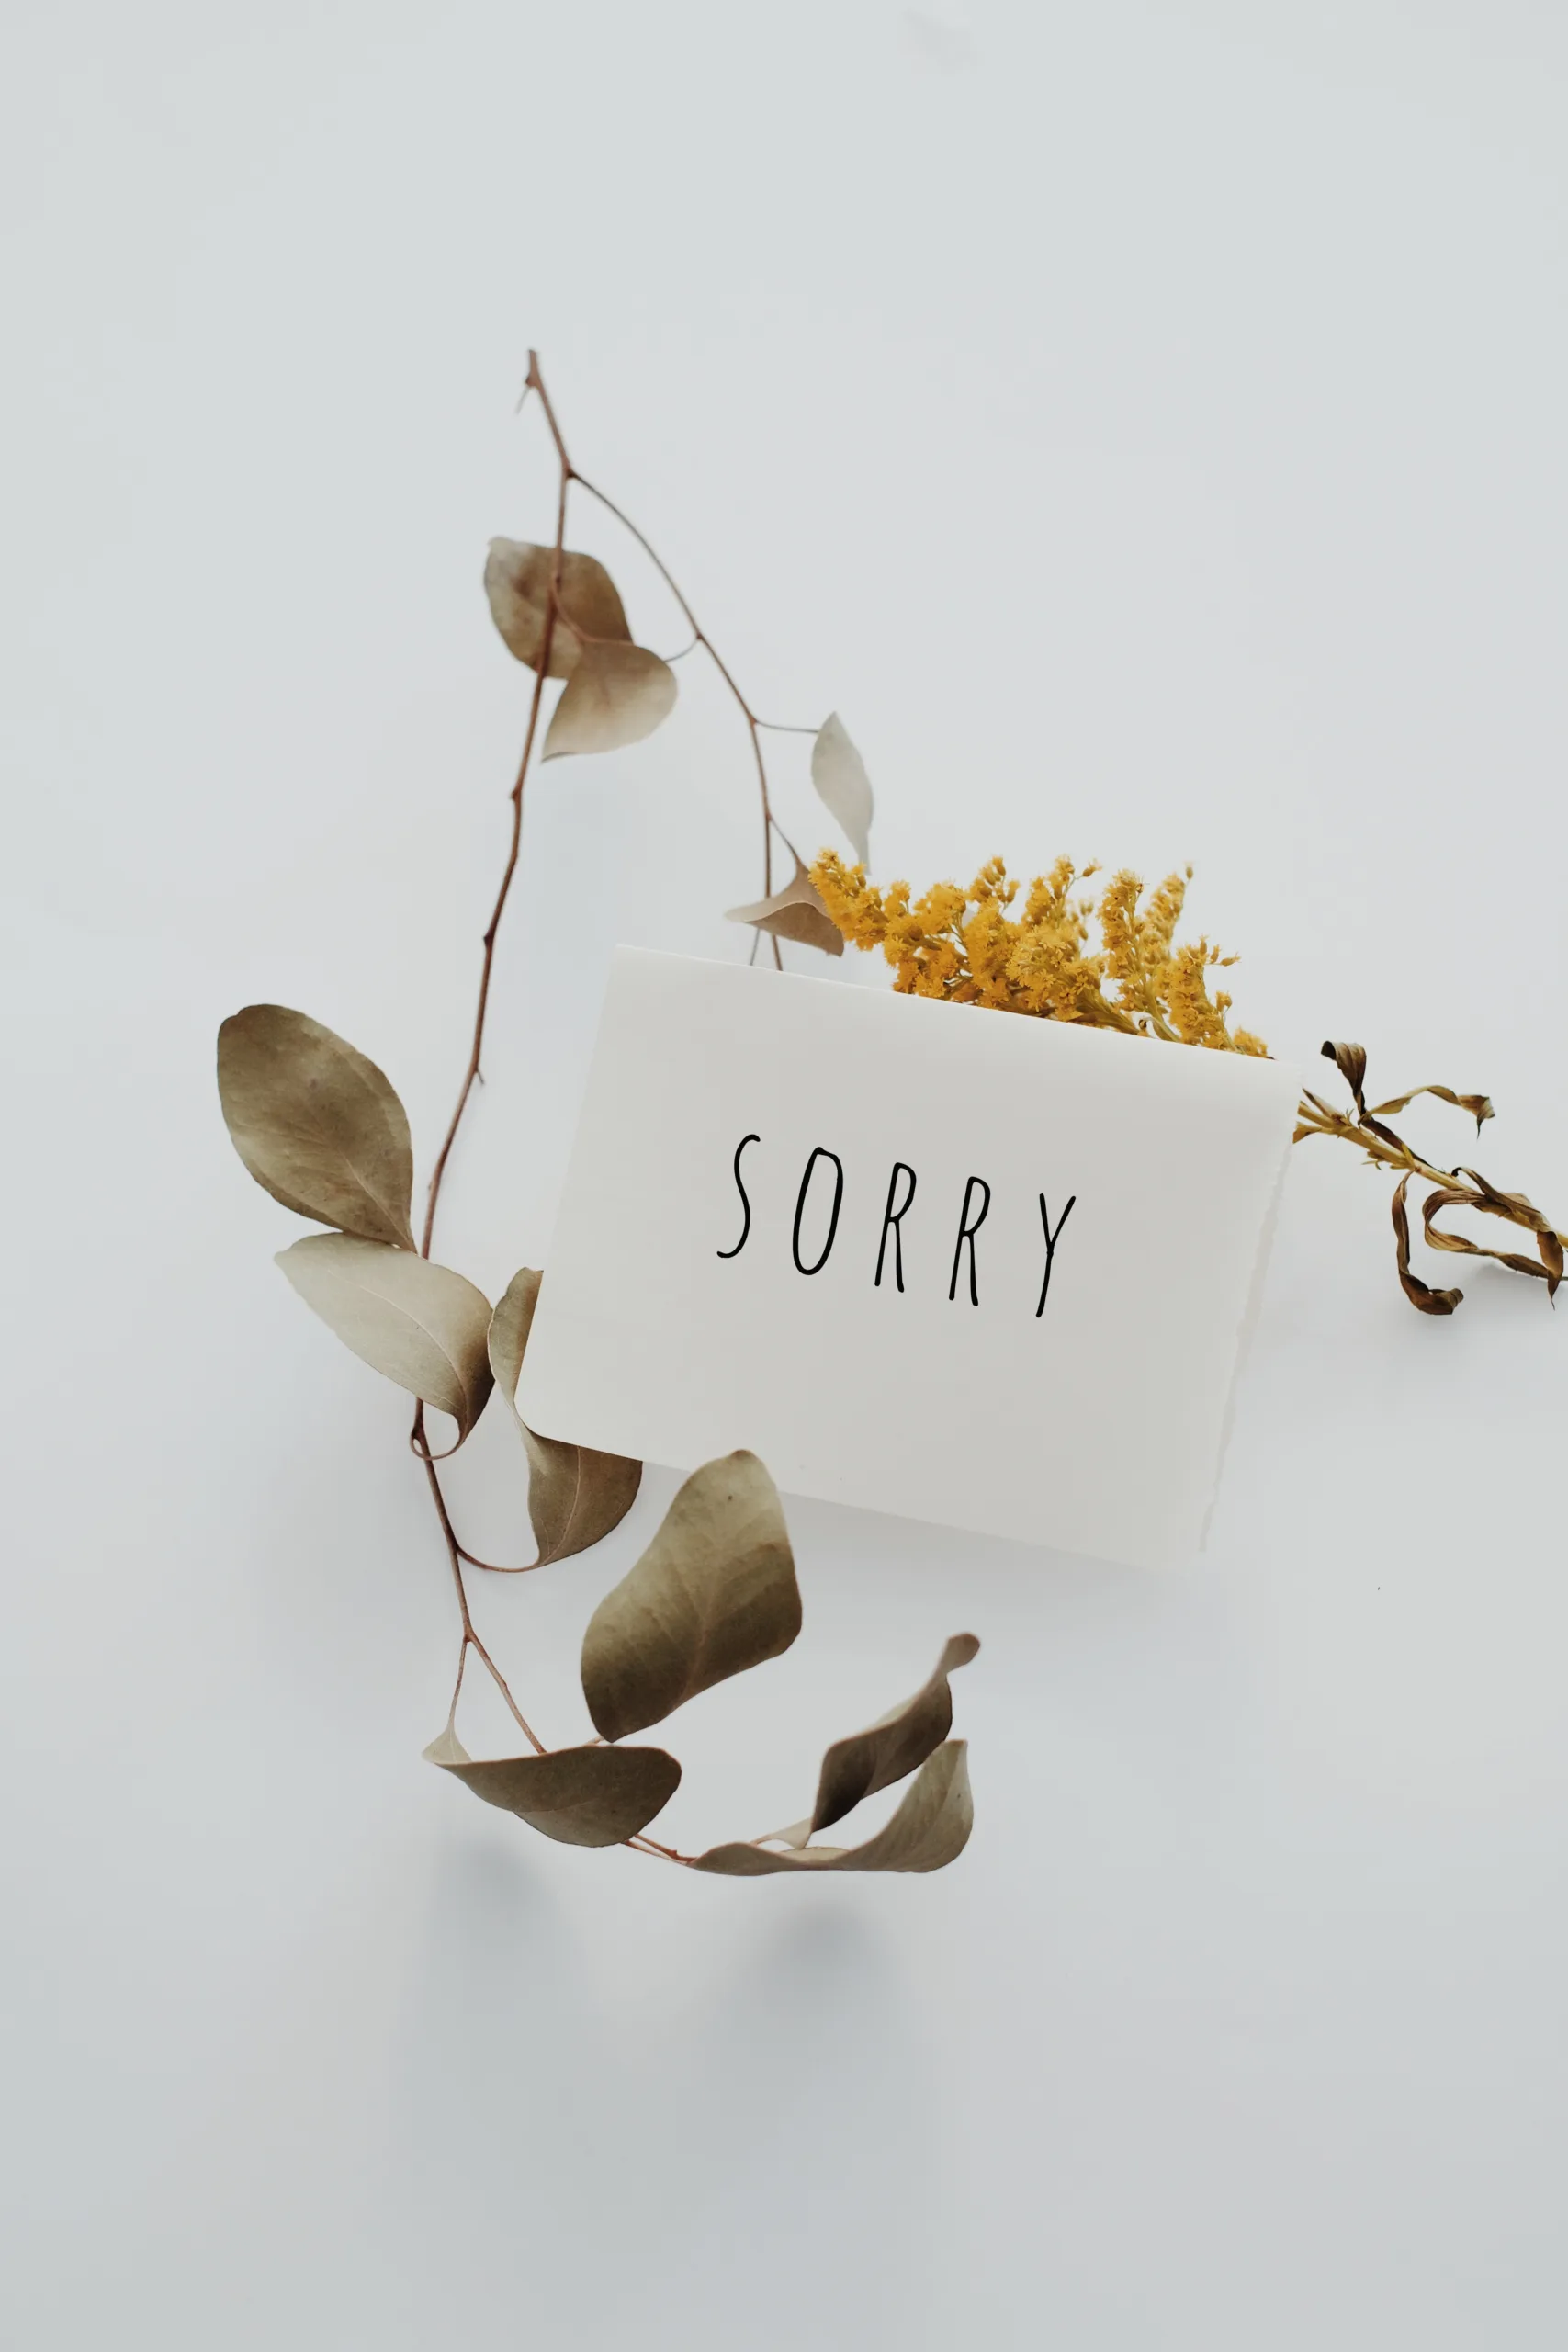 how to say i'm sorry in japanese